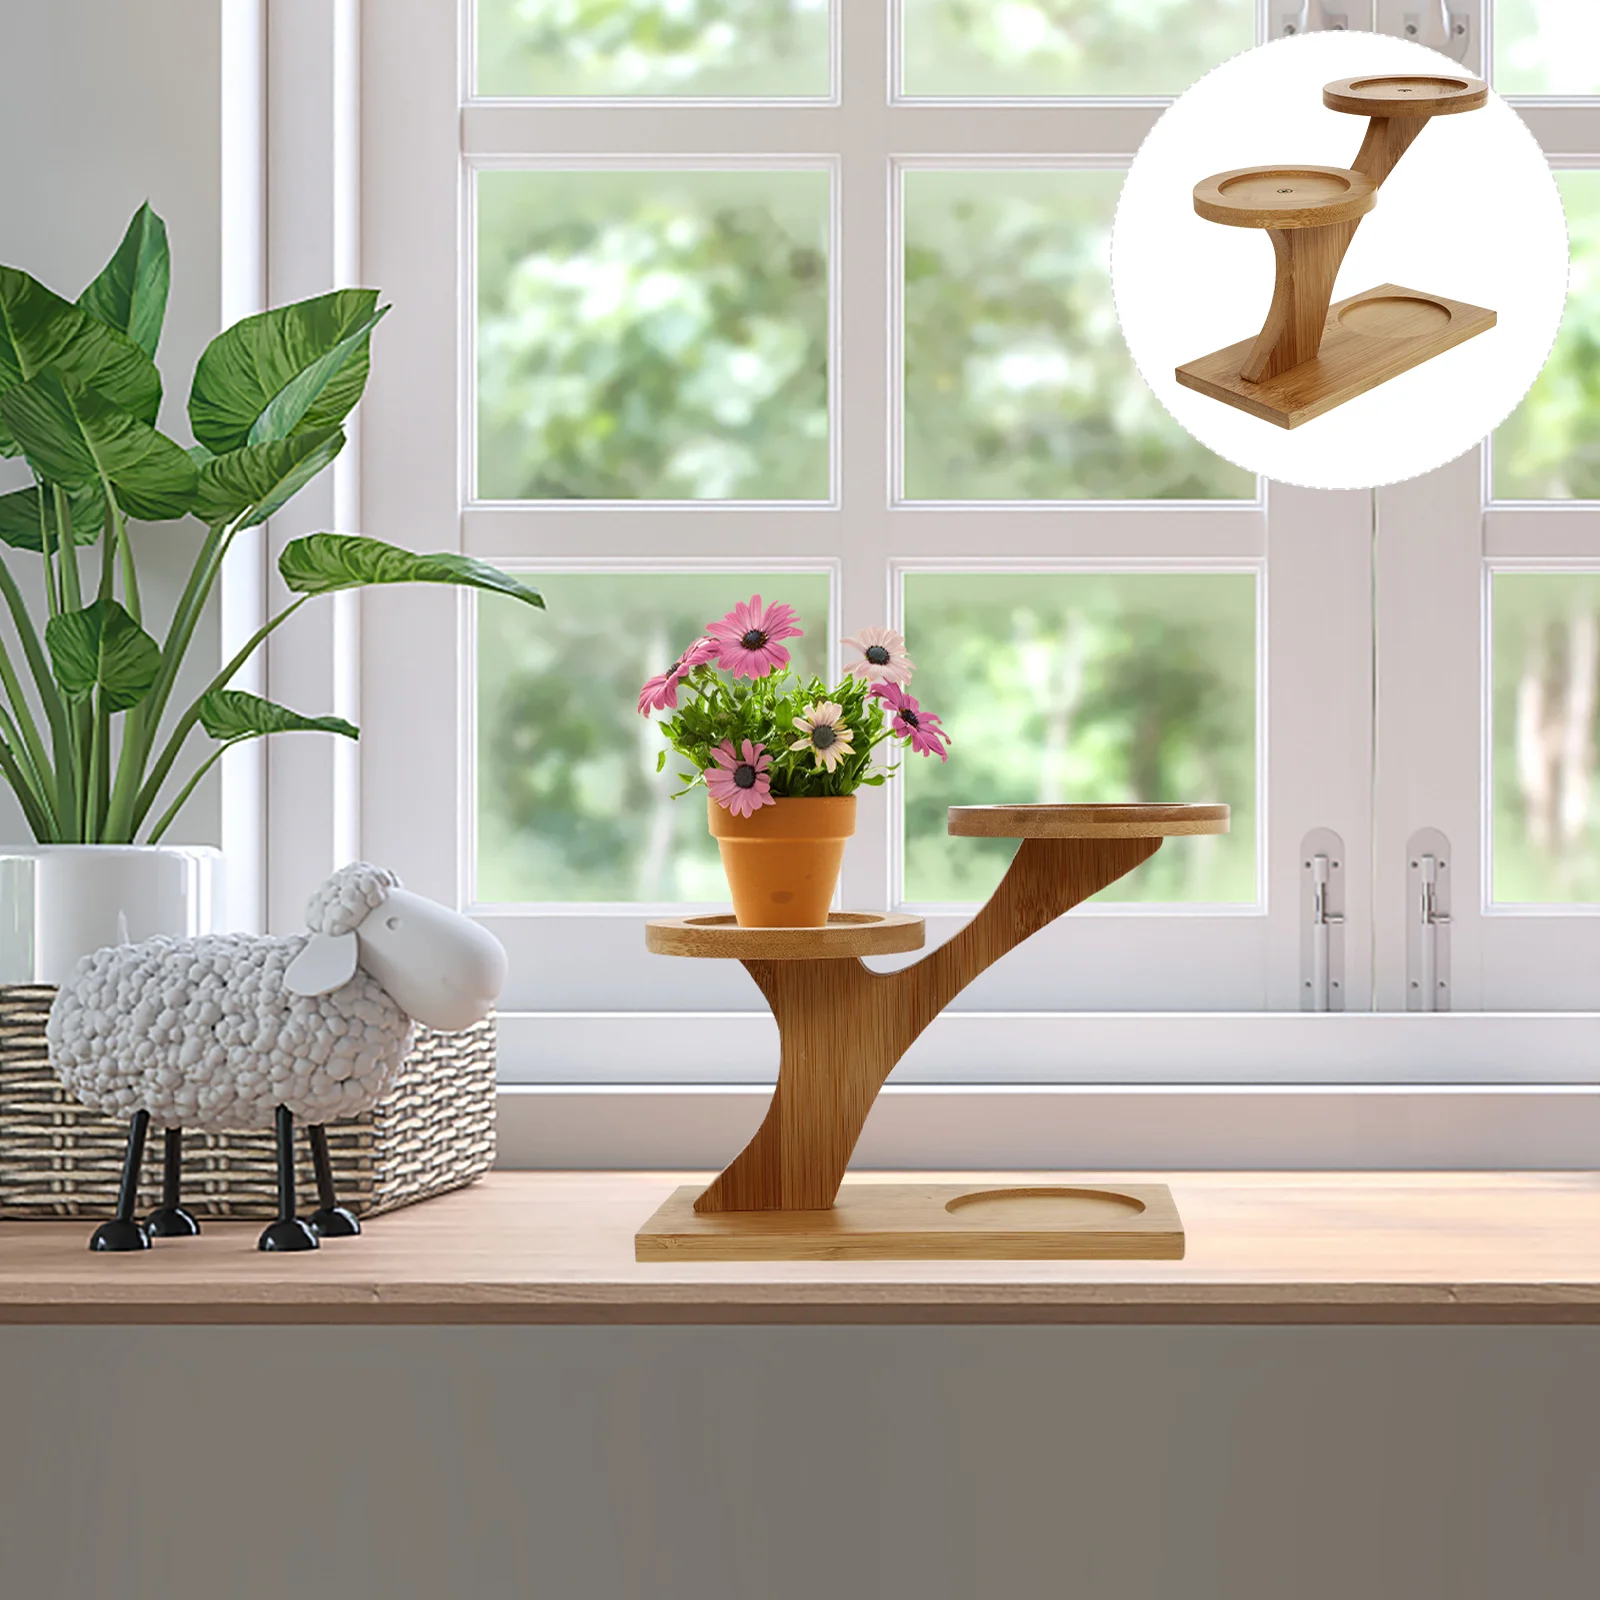 

House Plants Indoors Live Holder Wood Cake Stand Tabletop Stand Flower Pot Display Stand Stepped Planter Shelf